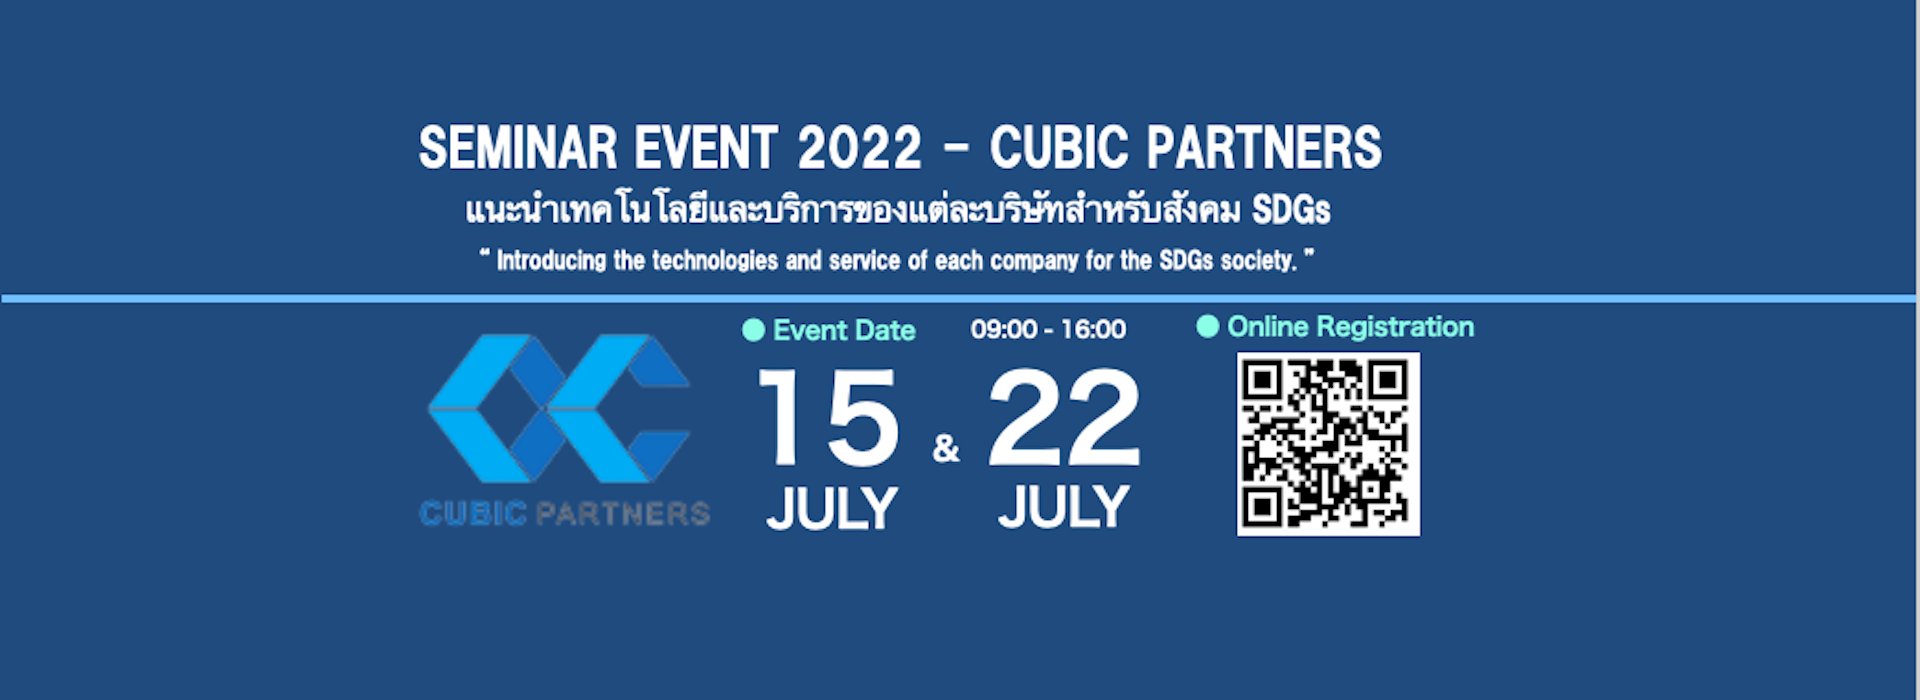 THE SEMINAR OF CUBIC PARTNERS 2022